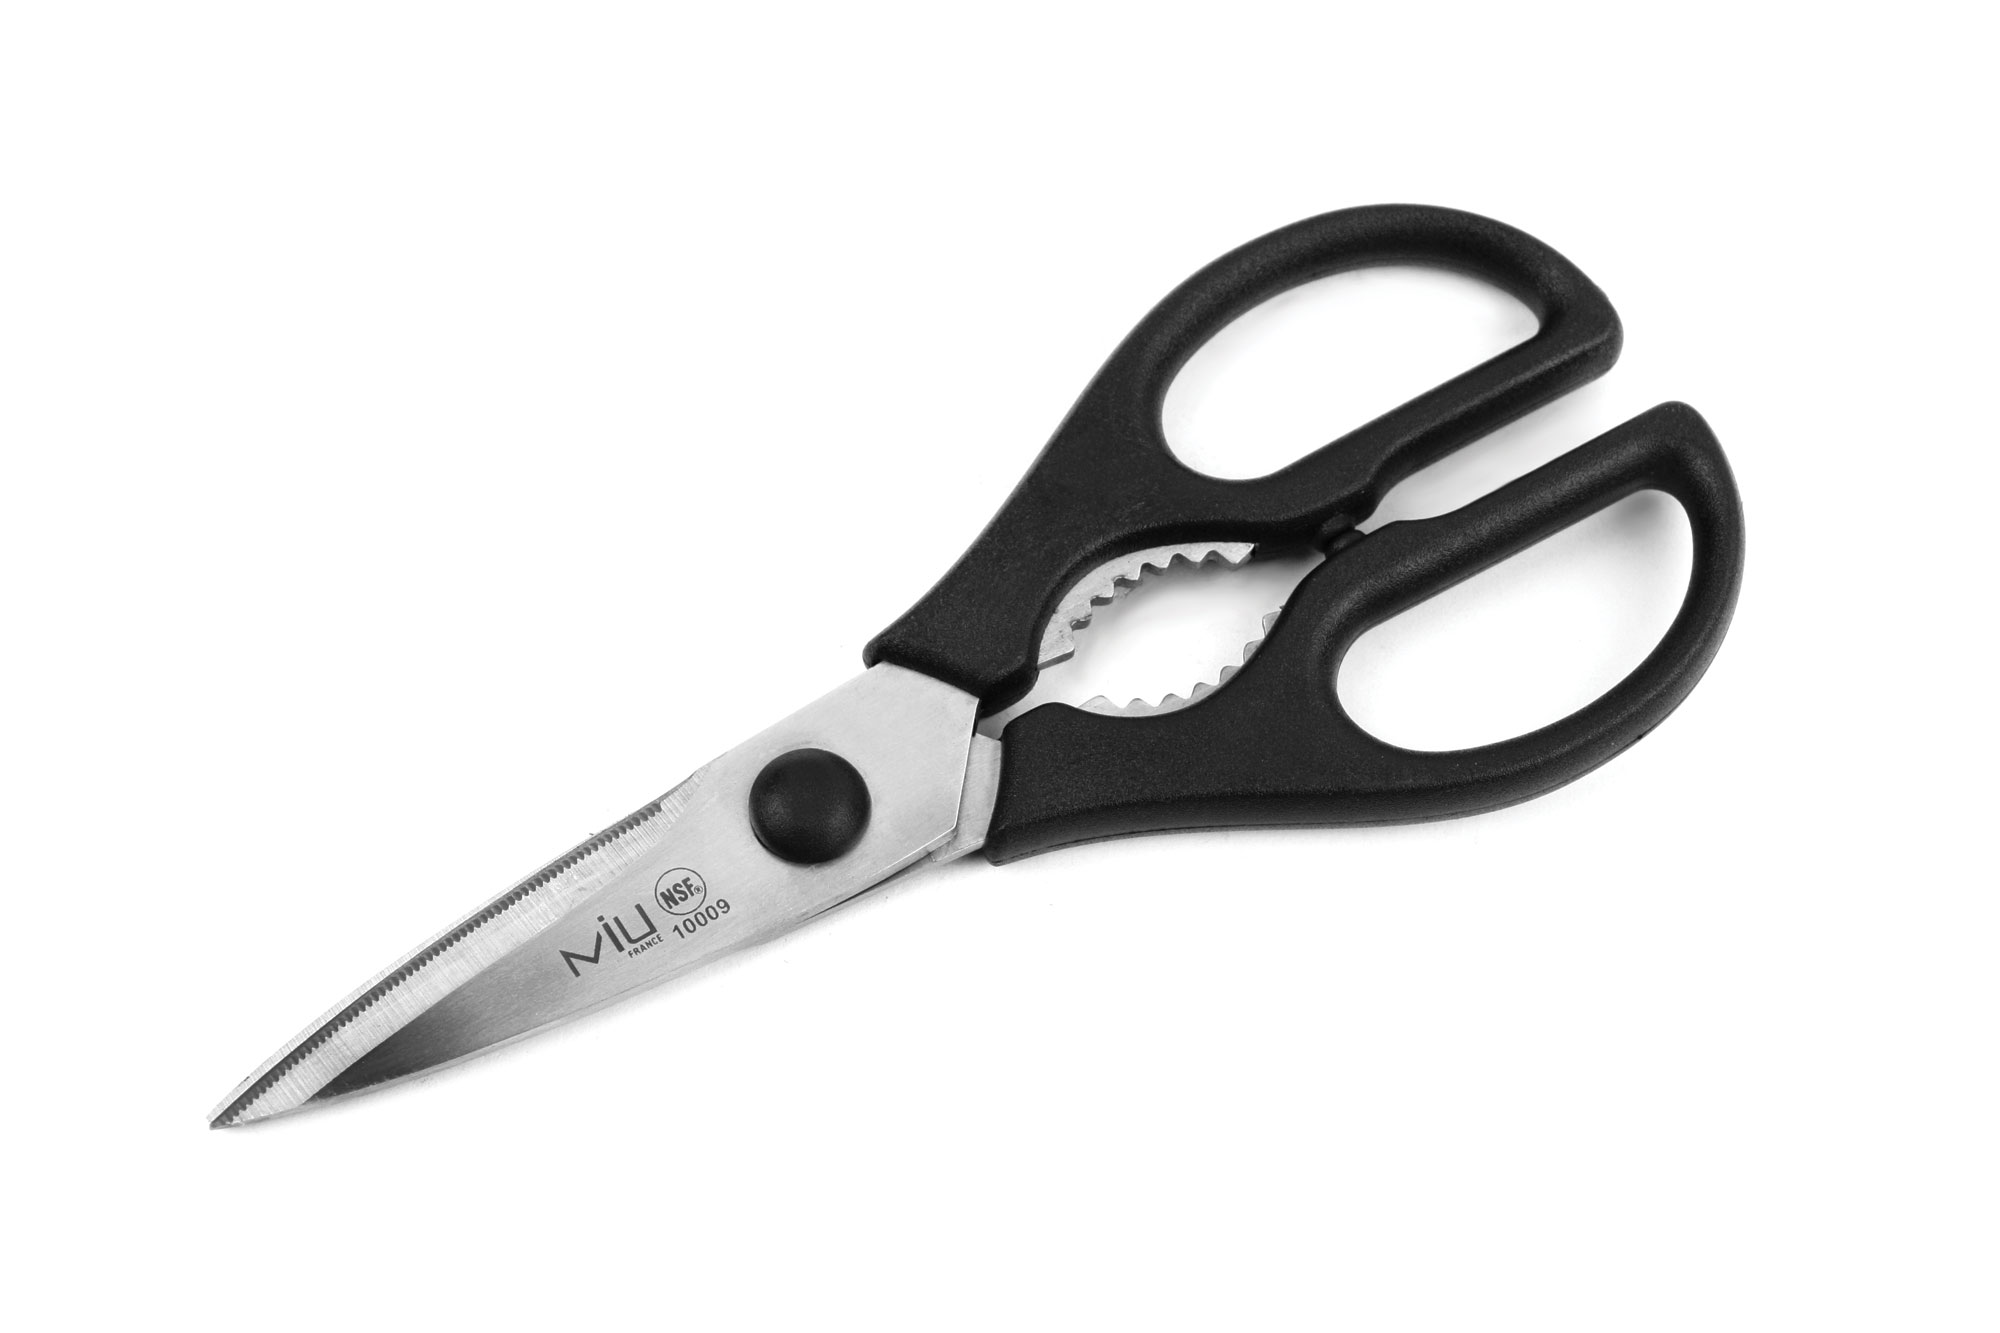 Come-Apart Kitchen Shears | Cutlery and More